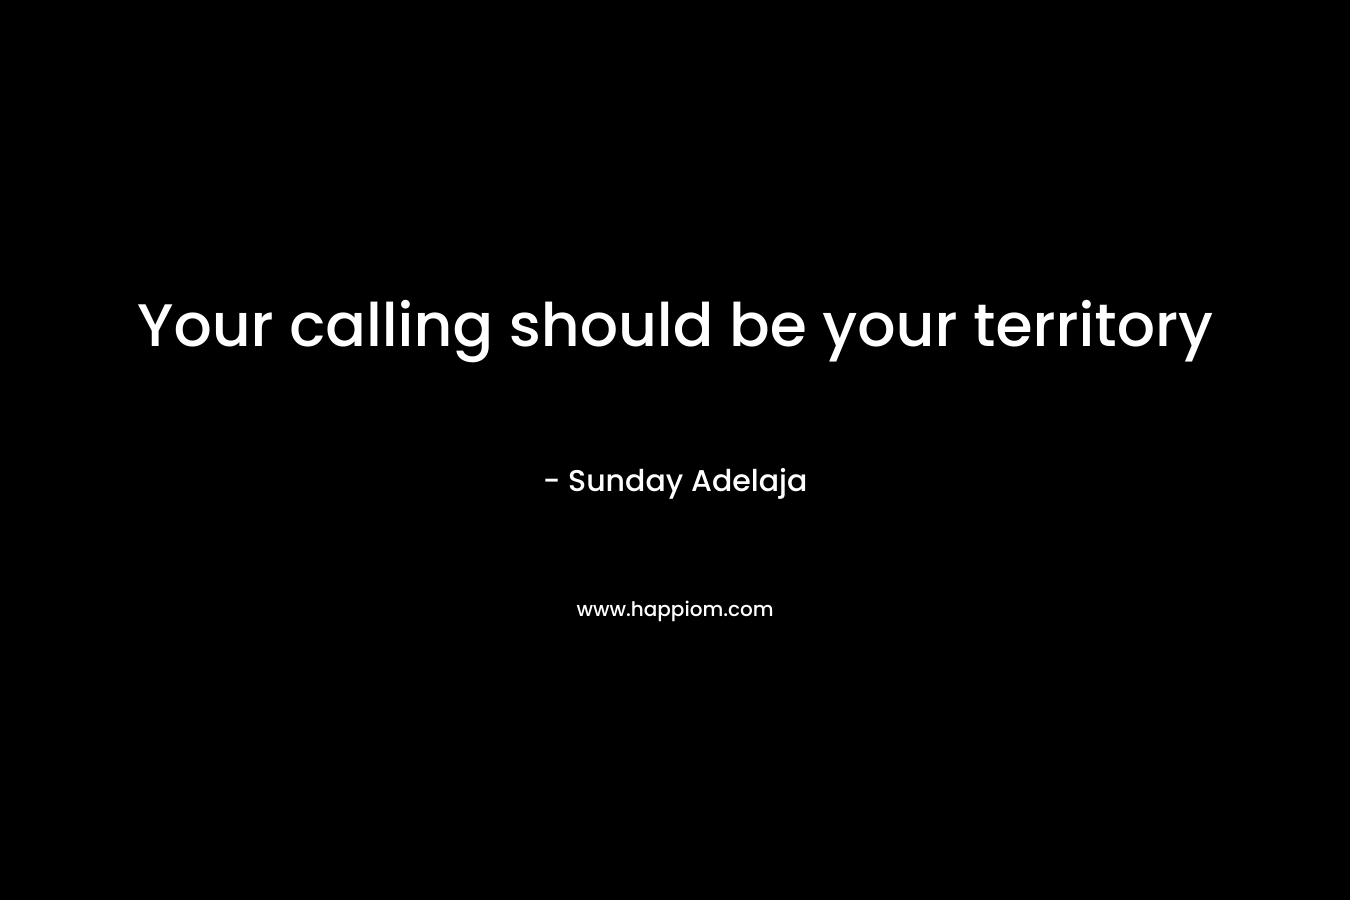 Your calling should be your territory